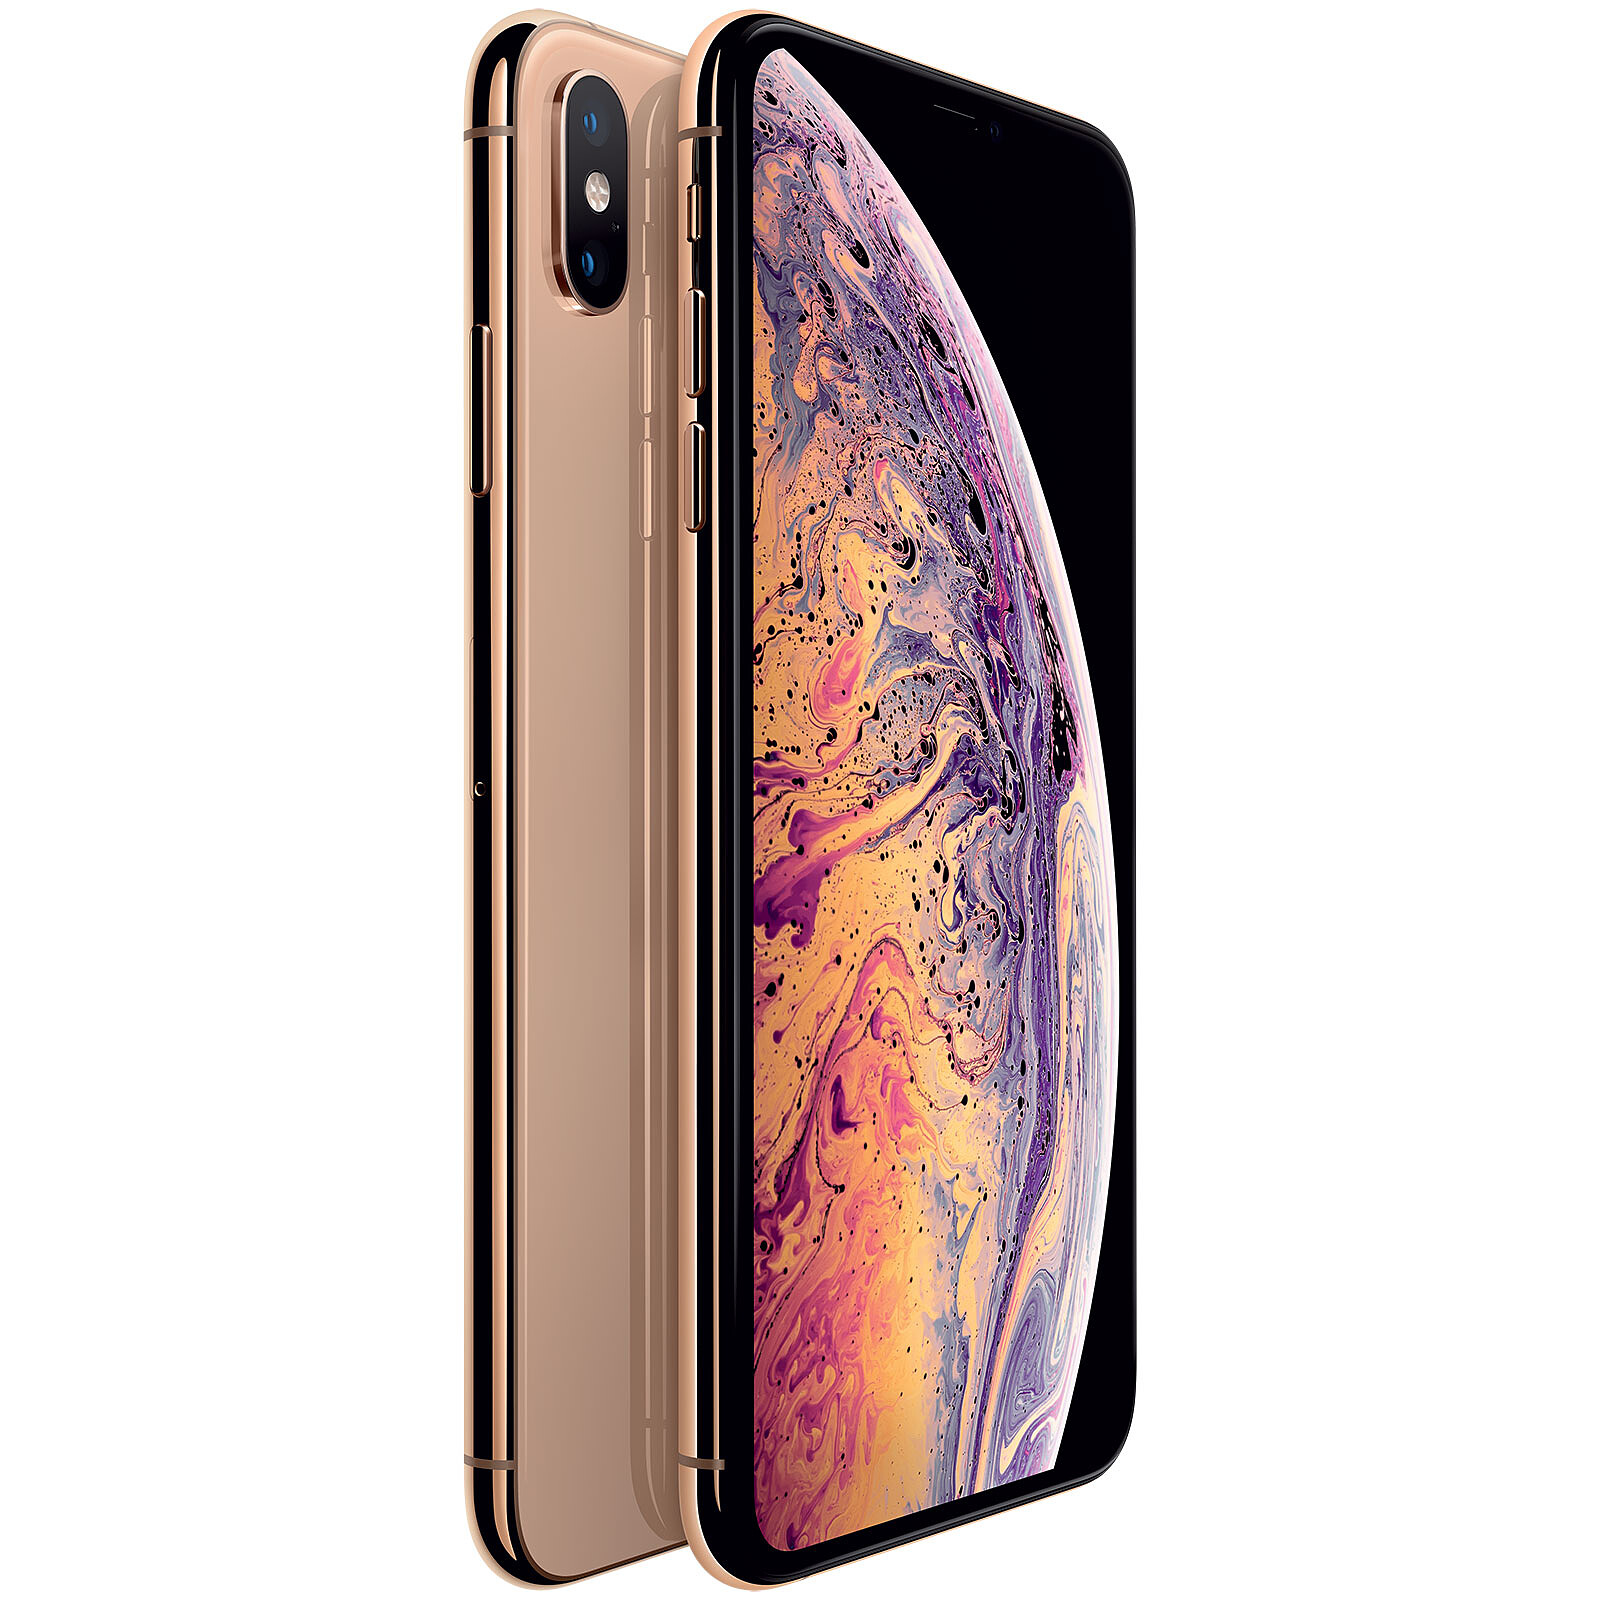 Apple iPhone Xs Max 512 Go Or · Reconditionné - Smartphone reconditionné Apple sur LDLC